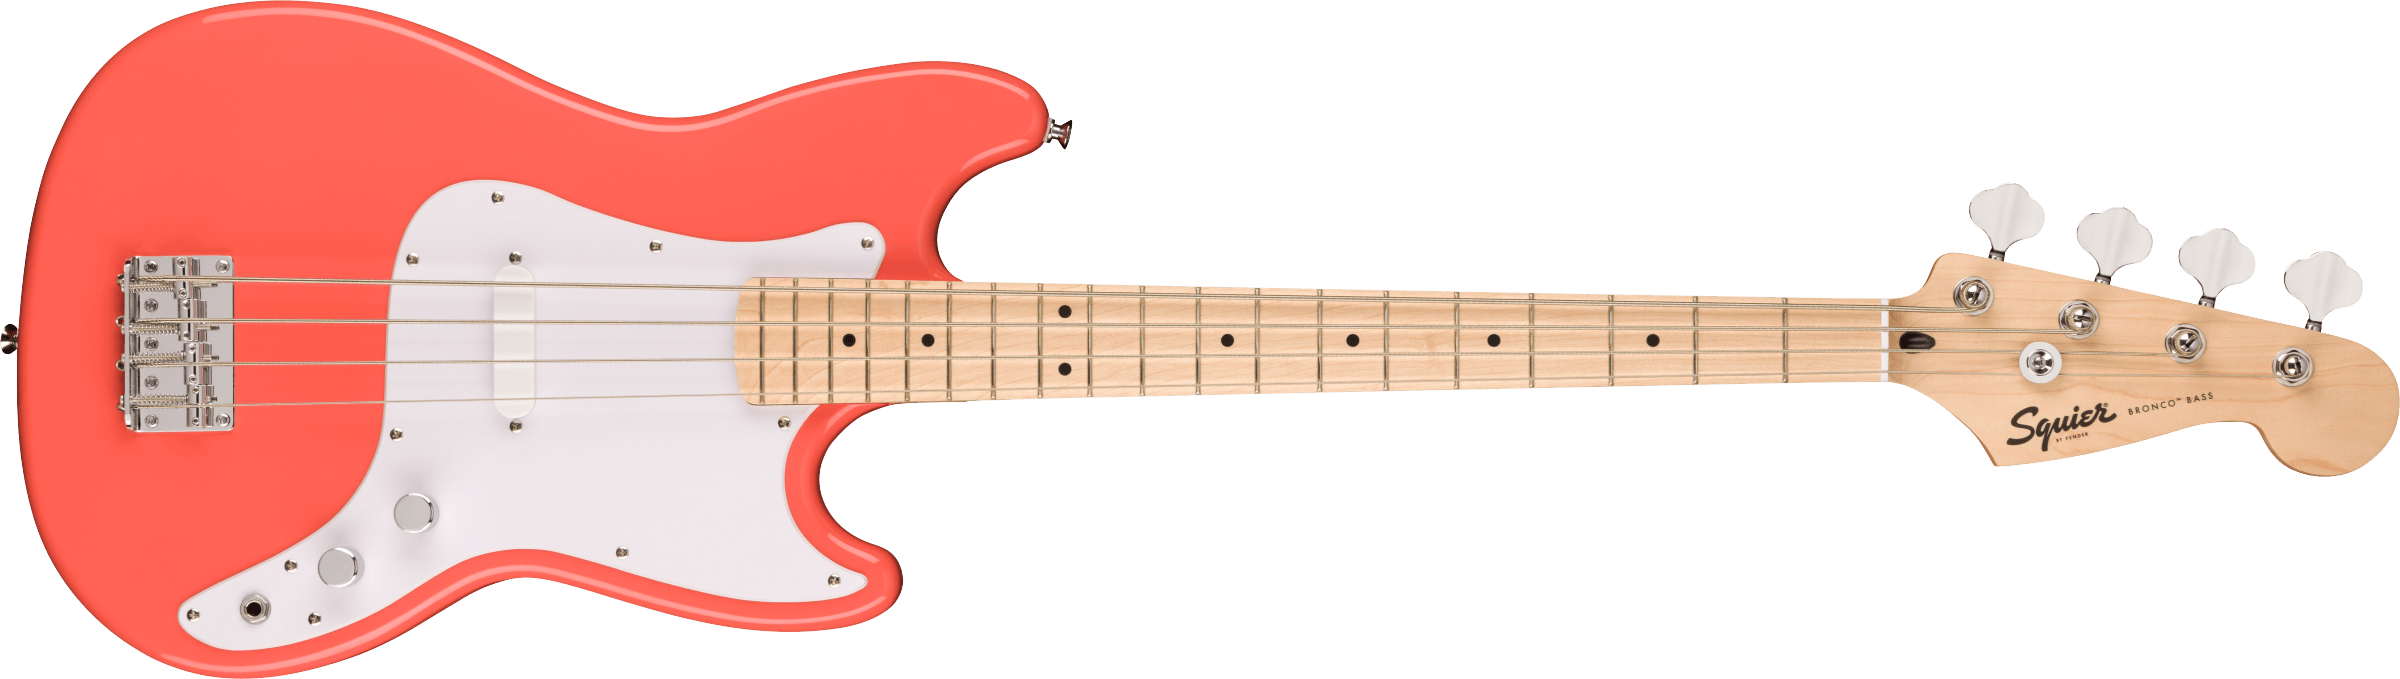 Squier  Squier Sonic Bronco Bass, Maple Fingerboard, White Pickguard, Tahitian Coral